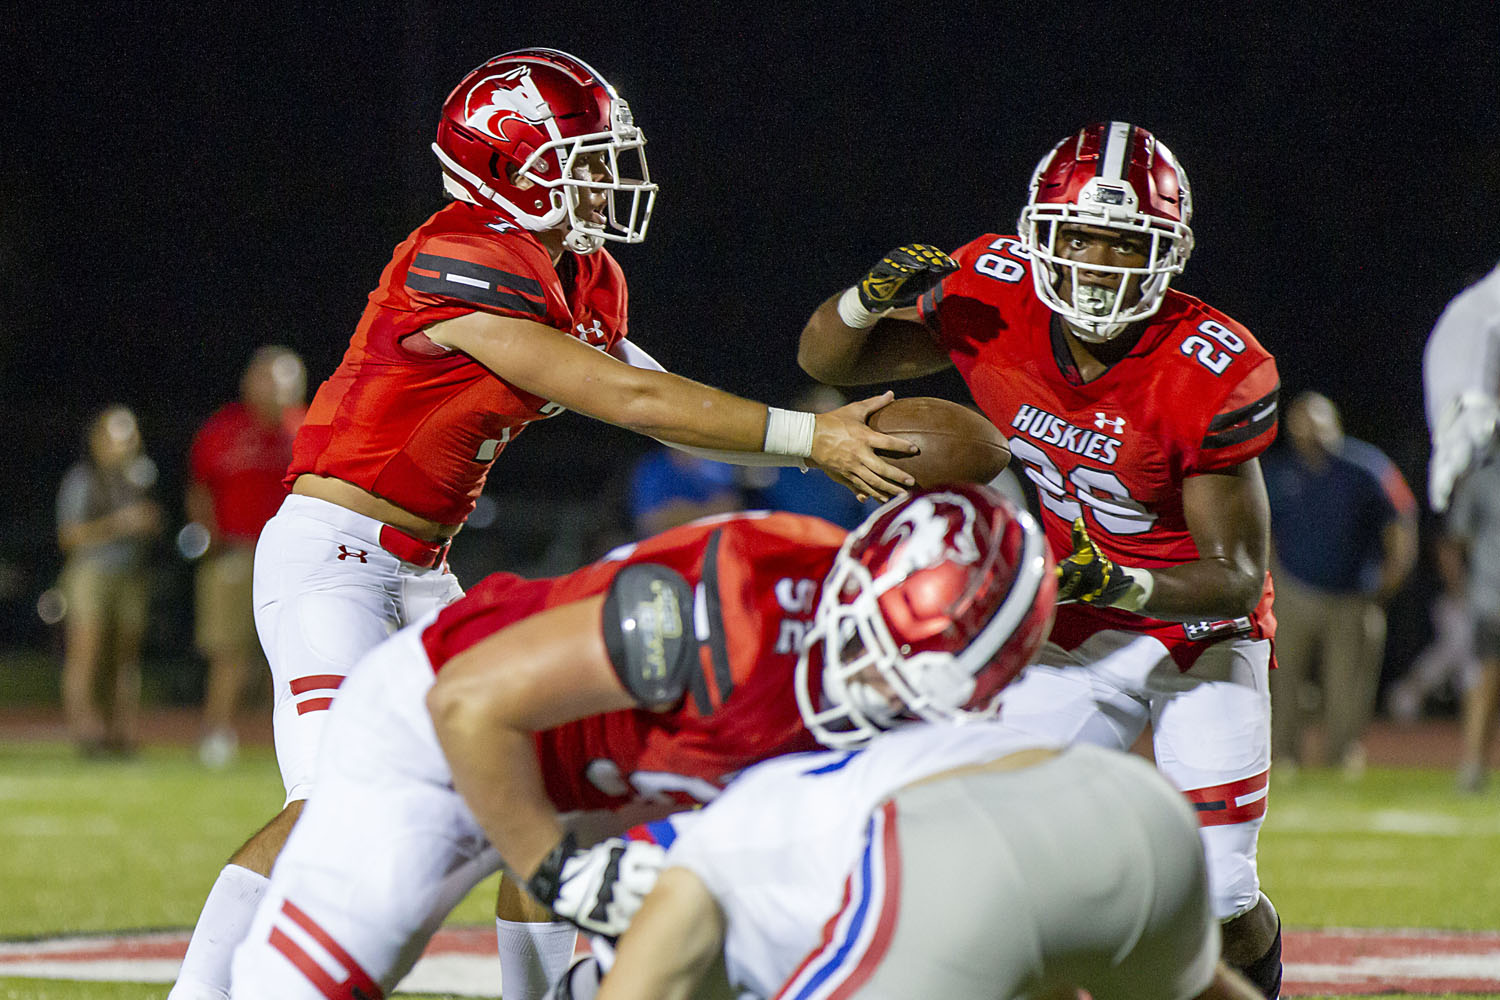 Class 7A Reclassification: Not much changes for Hewitt-Trussville in Region 3